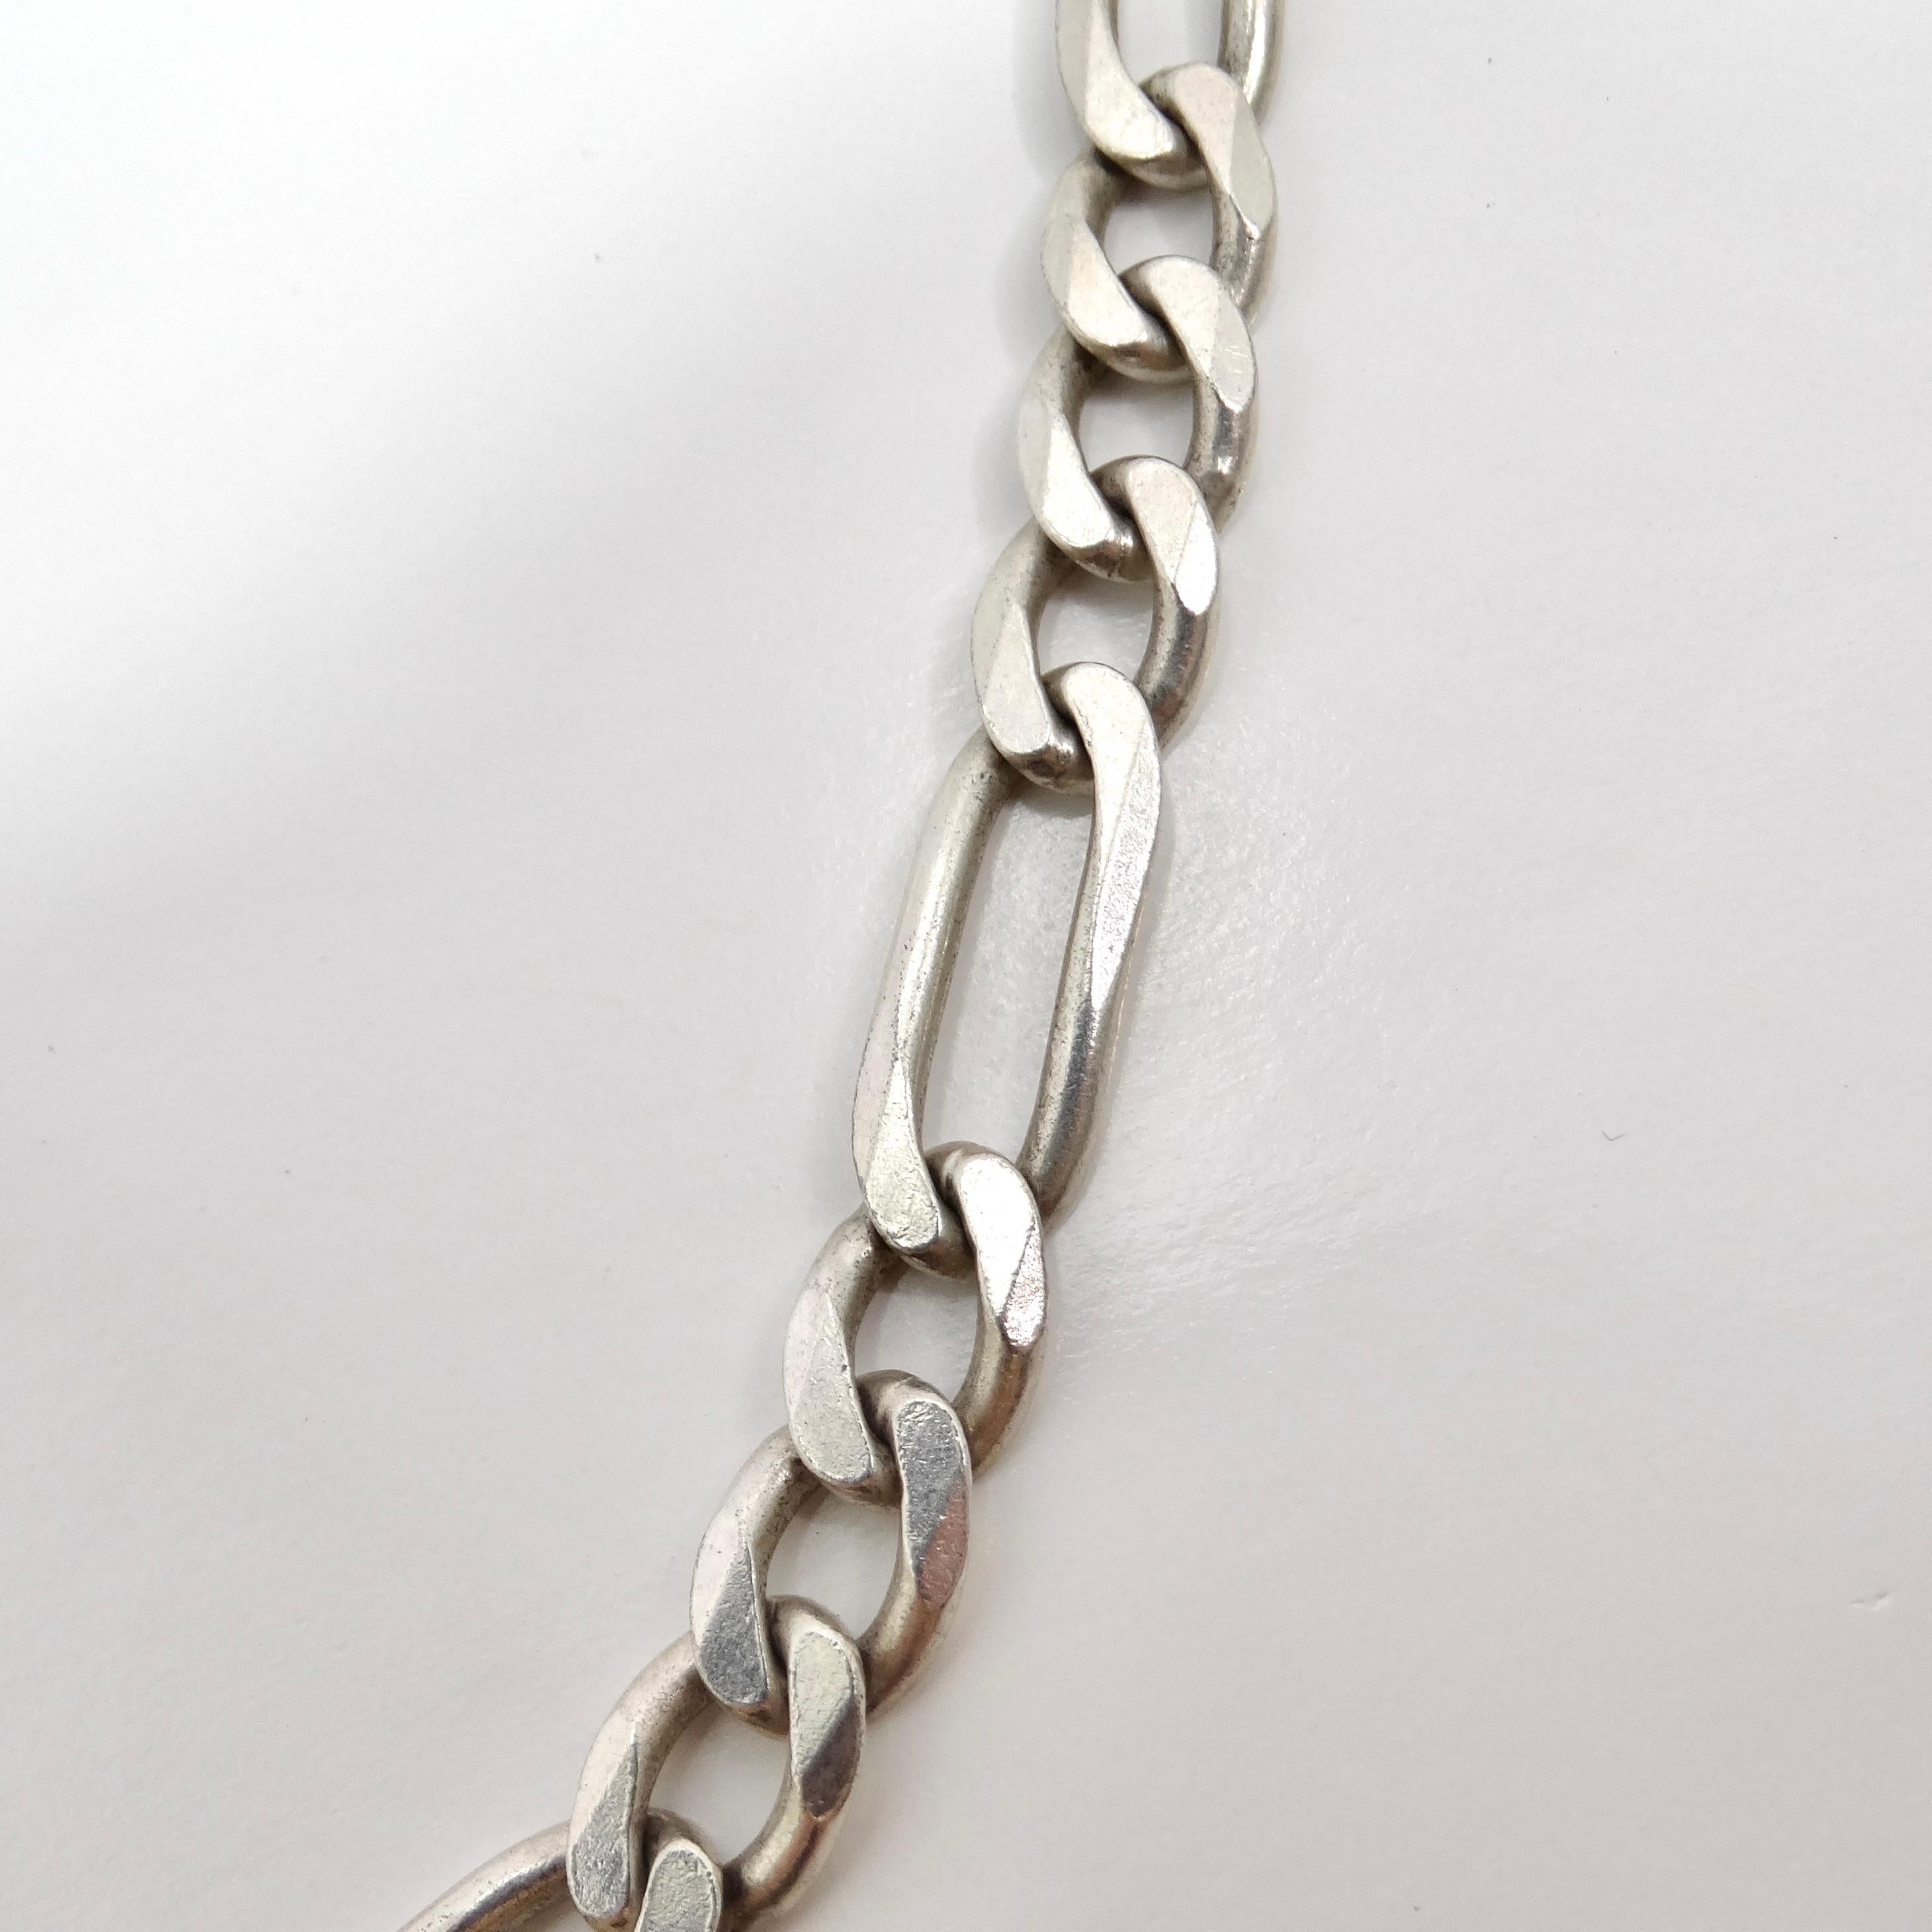 1980s Solid Silver Miami Link Chain Necklace In Good Condition For Sale In Scottsdale, AZ